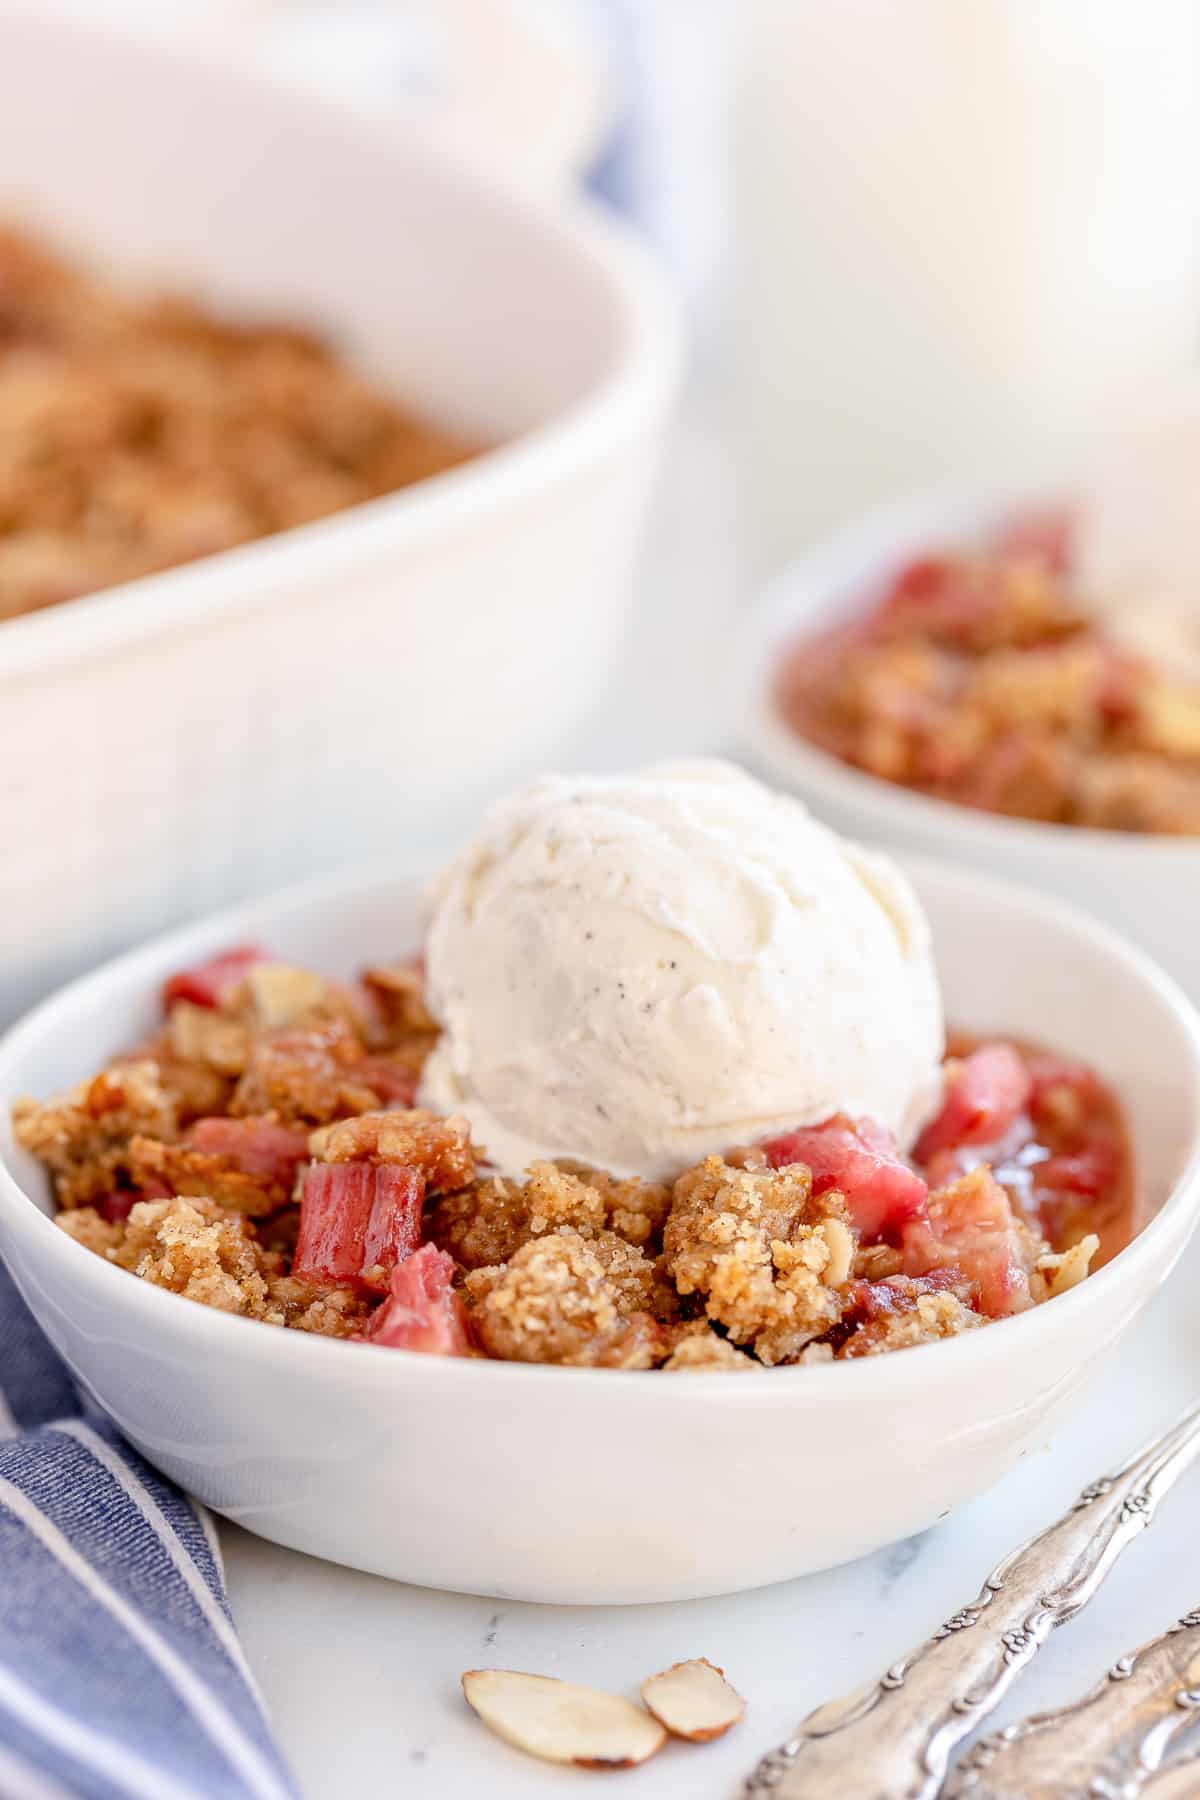 Rhubarb crisp in a white bowl topped with vanilla ice cream.